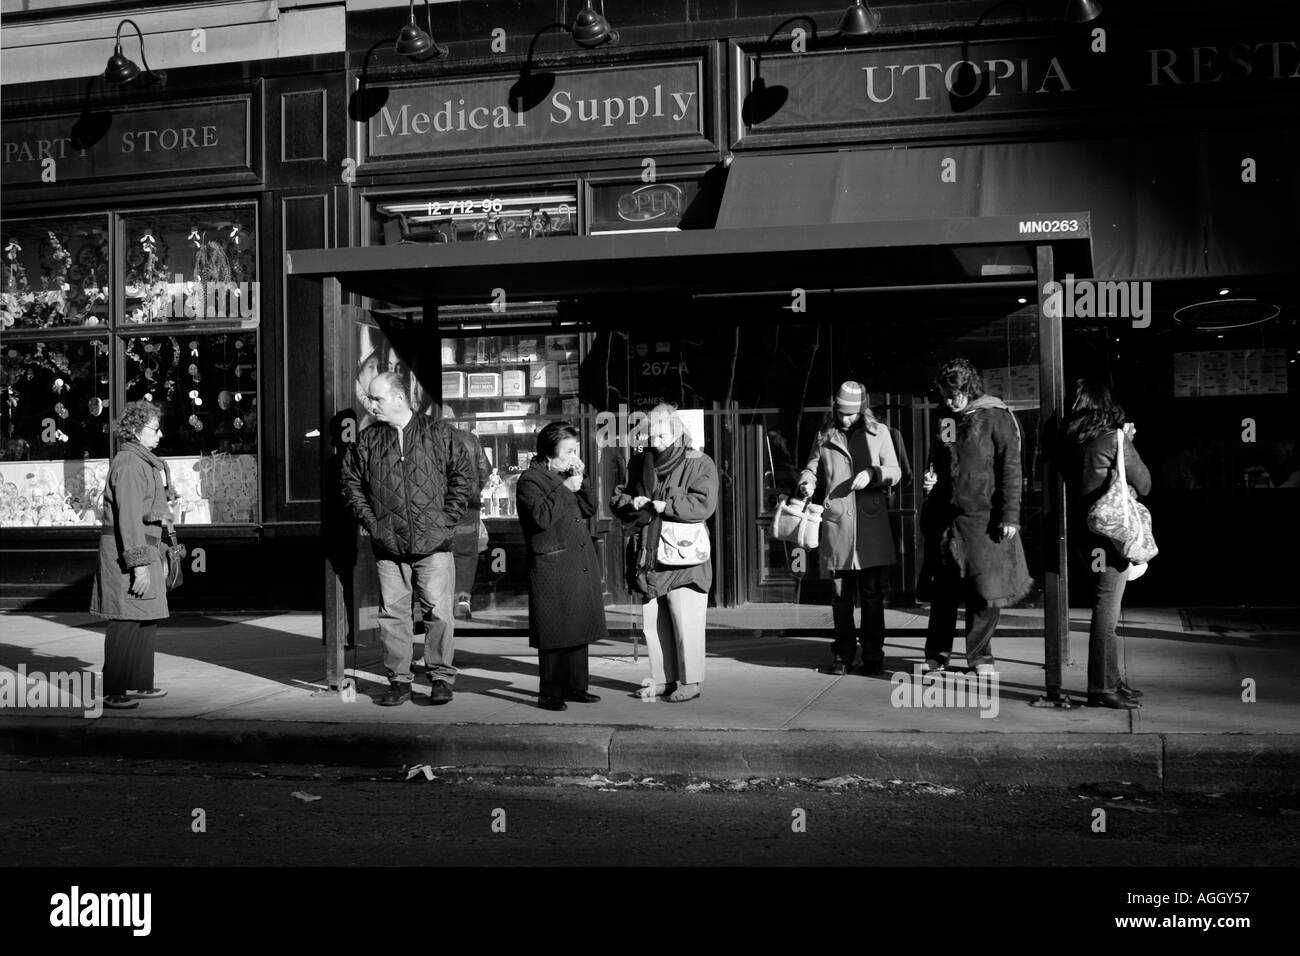 street scene in black white New York City people waiting for a bus in a bus stop Stock Photo